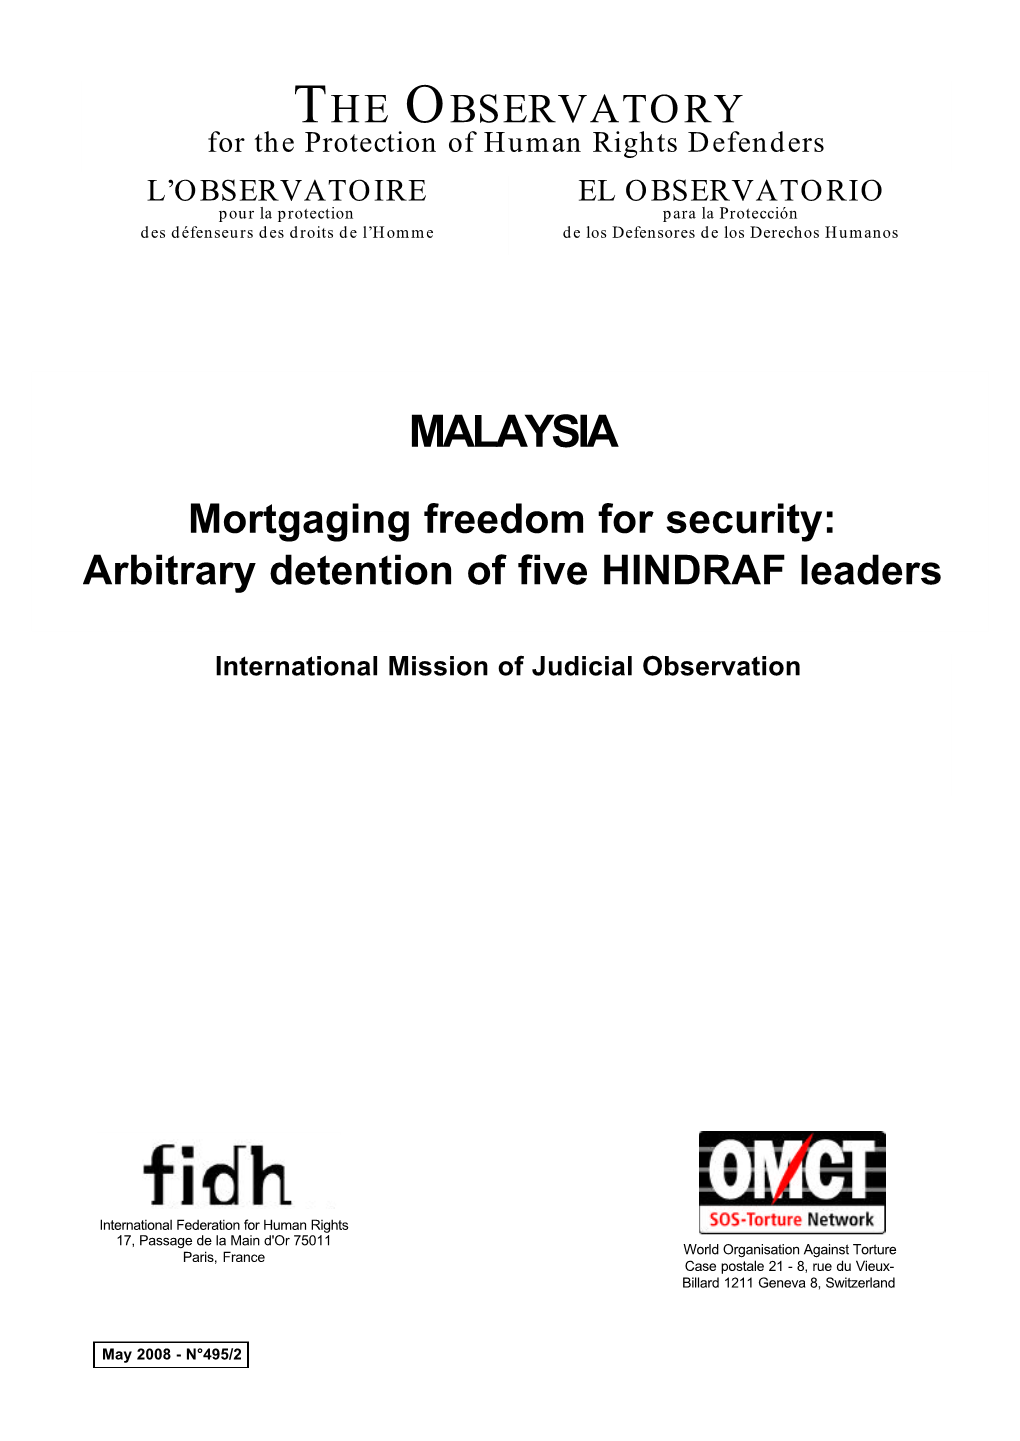 Malaysian Law Was Handed Discretion to Grant and Revoke Newspaper’S Publishing Down on February 26, 2008